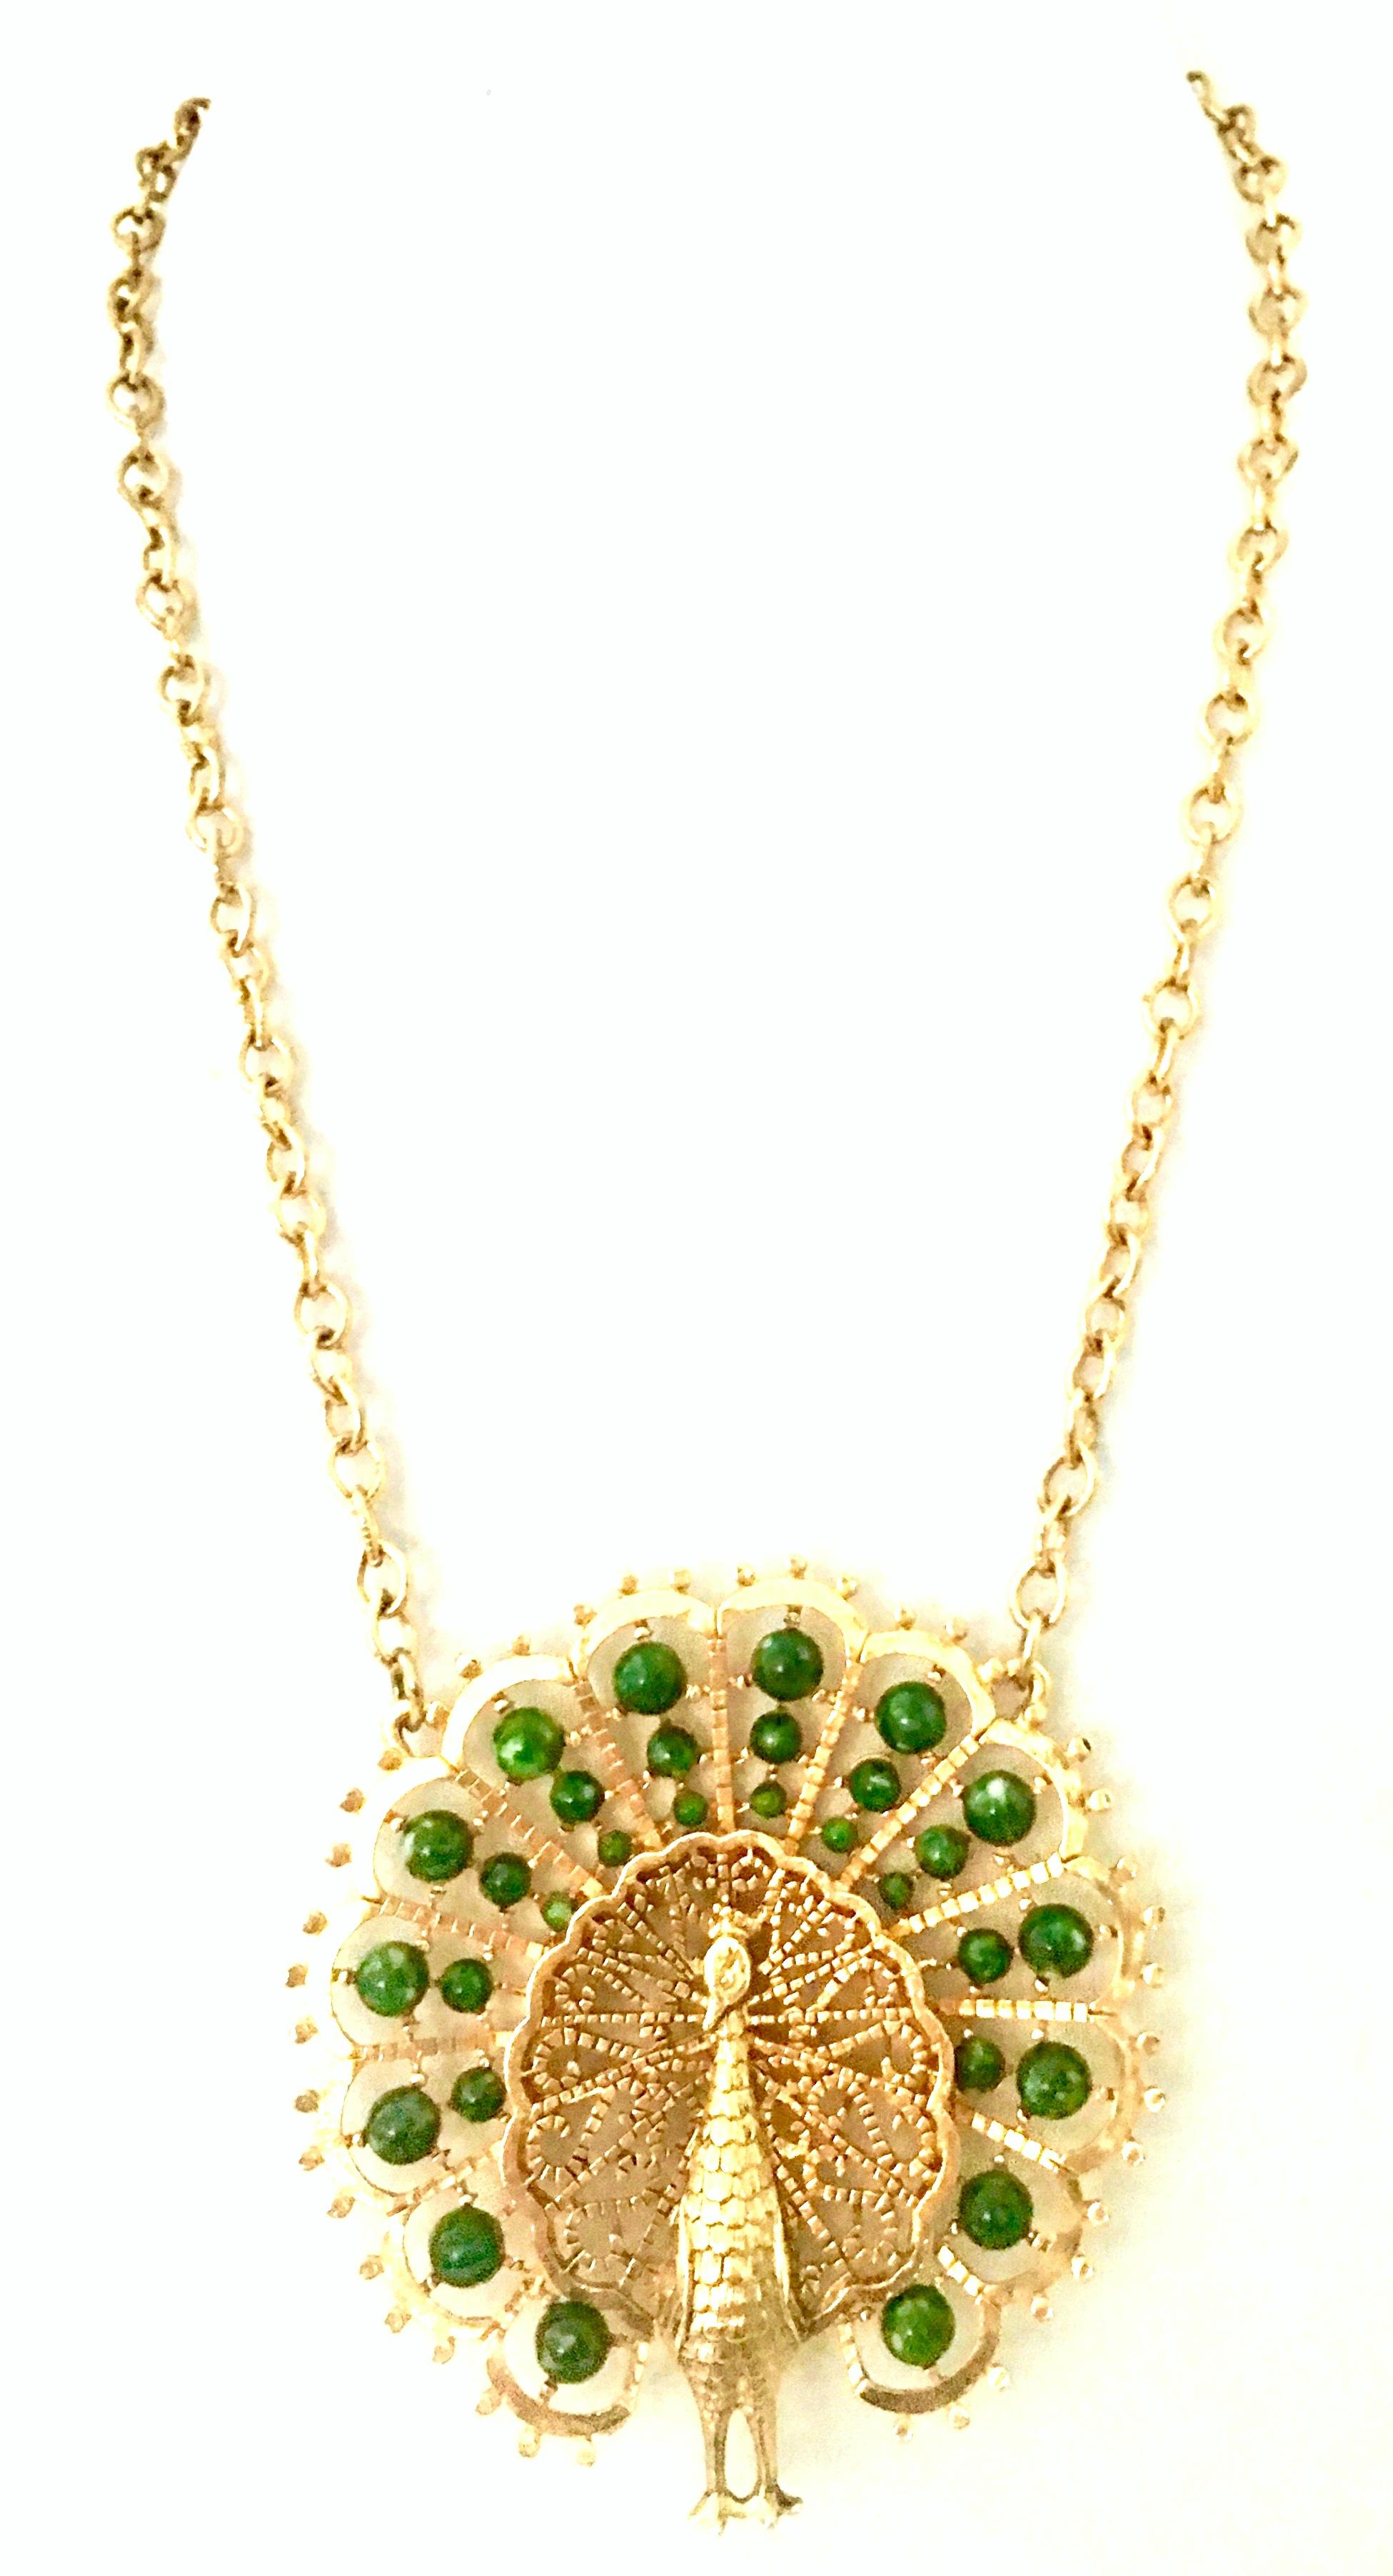 1970'S Monumental Gold Plate & Faux Jade Bead Peacock Pendant Necklace By, Gold Crown Inc. This filigree detail monumental pendant necklace features a 3.5